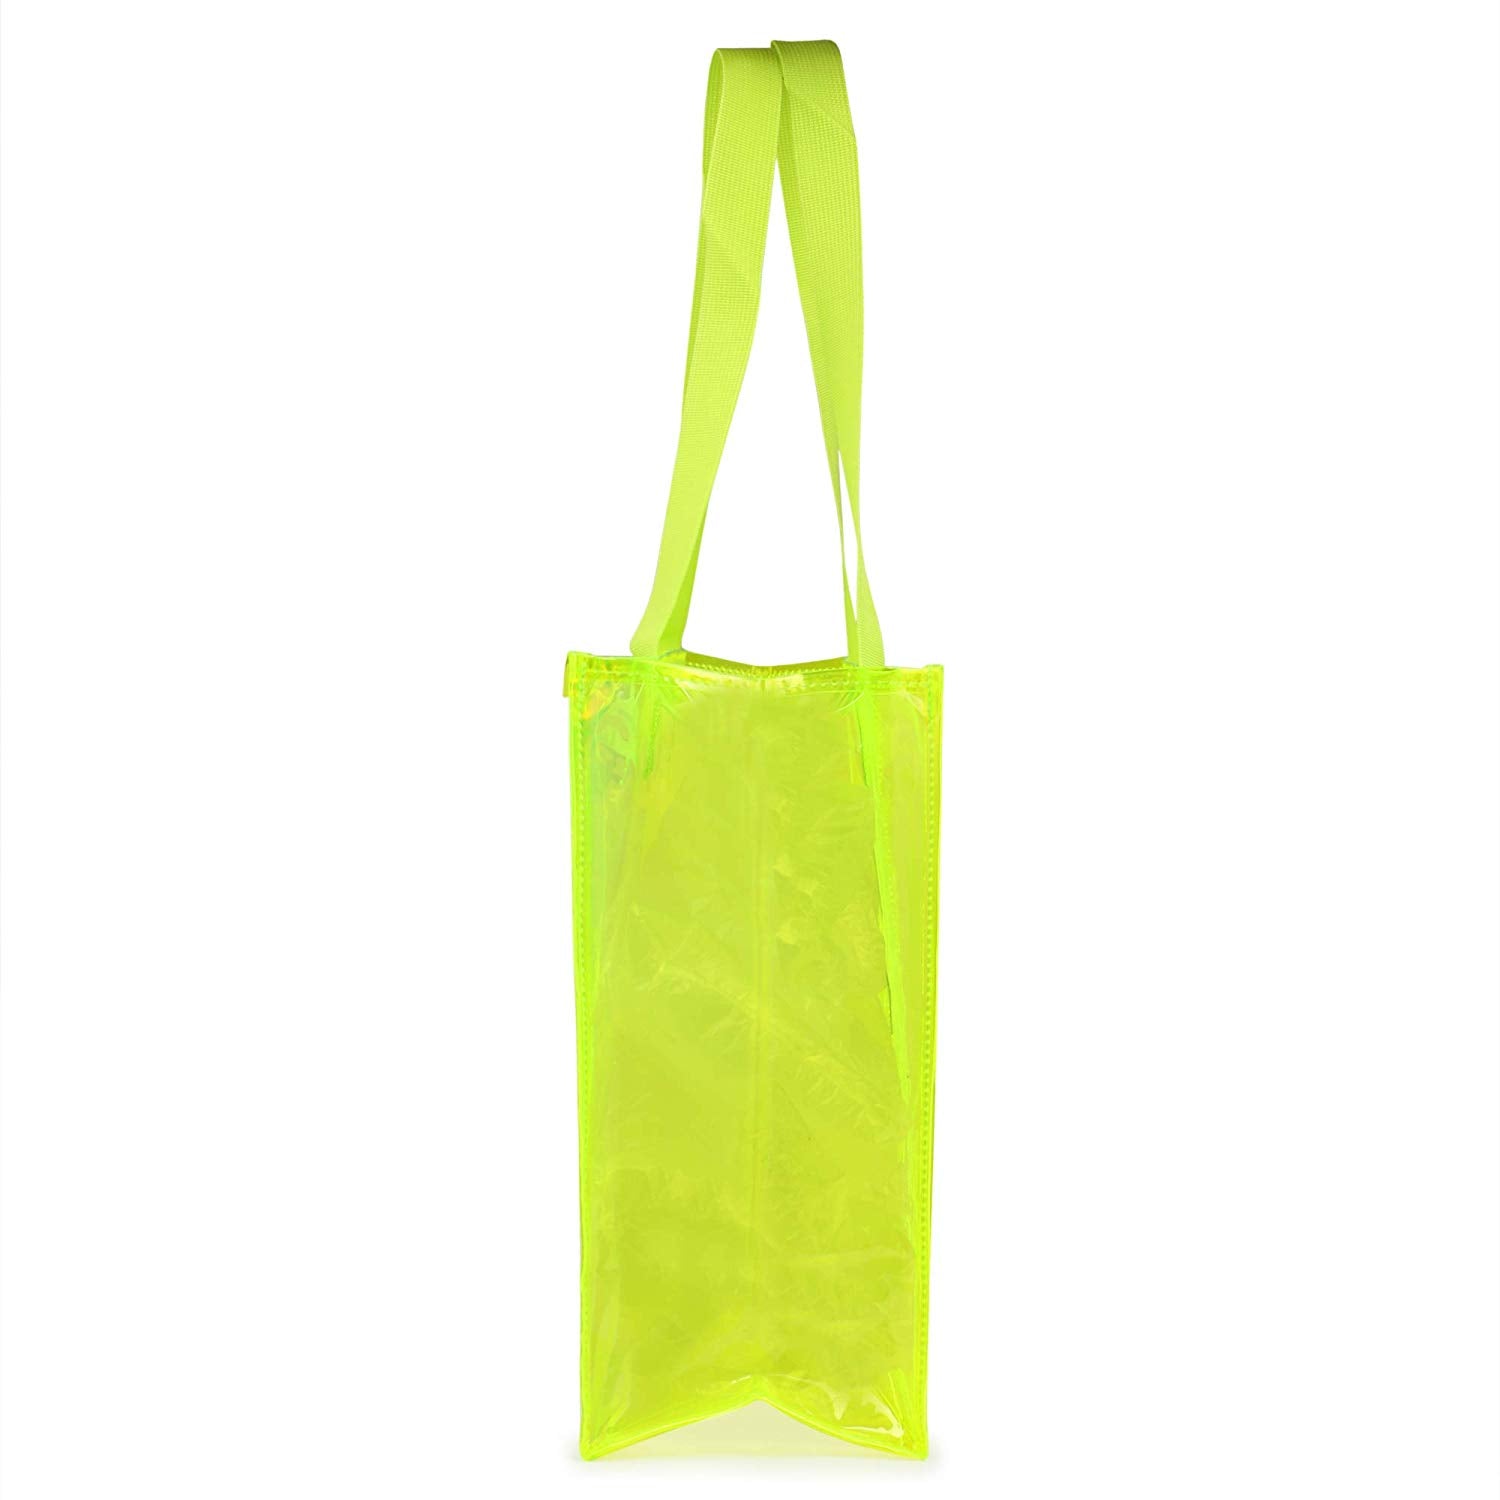 HL Tote Bag Green With Busy Pouch Aqua